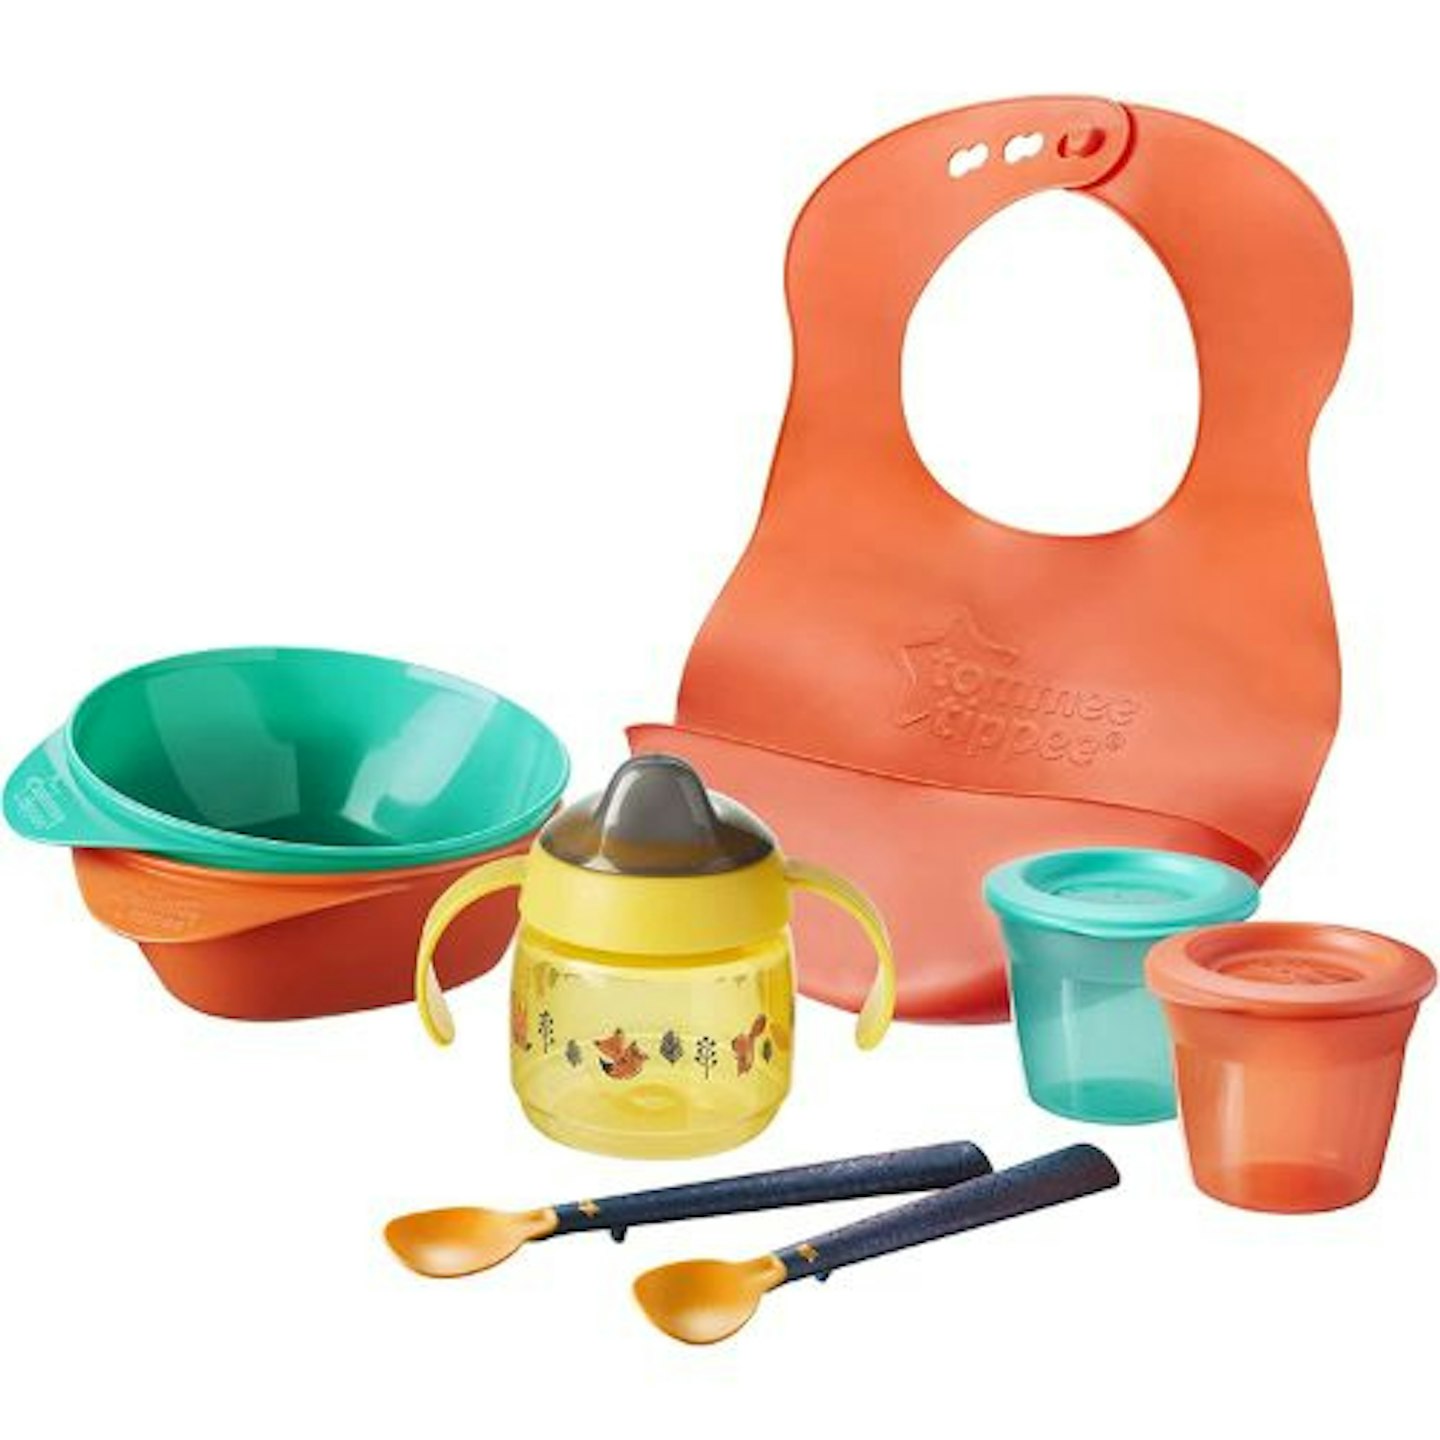 https://images.bauerhosting.com/affiliates/sites/12/motherandbaby/2022/08/Tommee-Tippee-Weaning-Kit.jpg?auto=format&w=1440&q=80